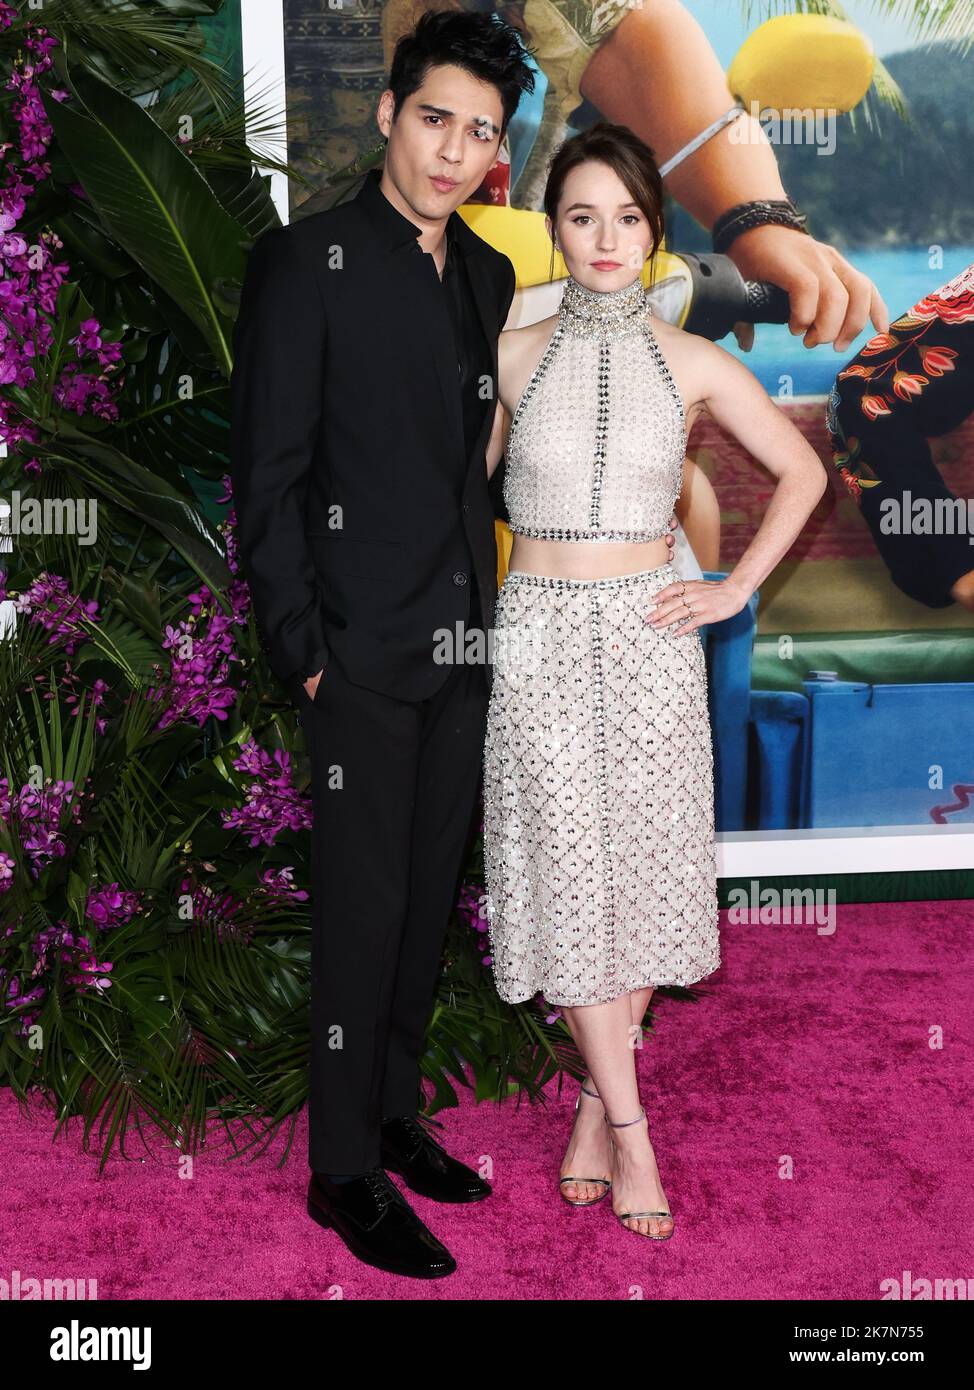 Westwood, United States. 17th Oct, 2022. WESTWOOD, LOS ANGELES, CALIFORNIA, USA - OCTOBER 17: Indonesian actor Maxime Bouttier wearing Dolce and Gabbana and American actress Kaitlyn Dever wearing a Miu Miu top and skirt arrive at the Los Angeles Premiere Of Universal Pictures' 'Ticket To Paradise' held at Regency Village Theatre on October 17, 2022 in Westwood, Los Angeles, California, United States. (Photo by Xavier Collin/Image Press Agency) Credit: Image Press Agency/Alamy Live News Stock Photo